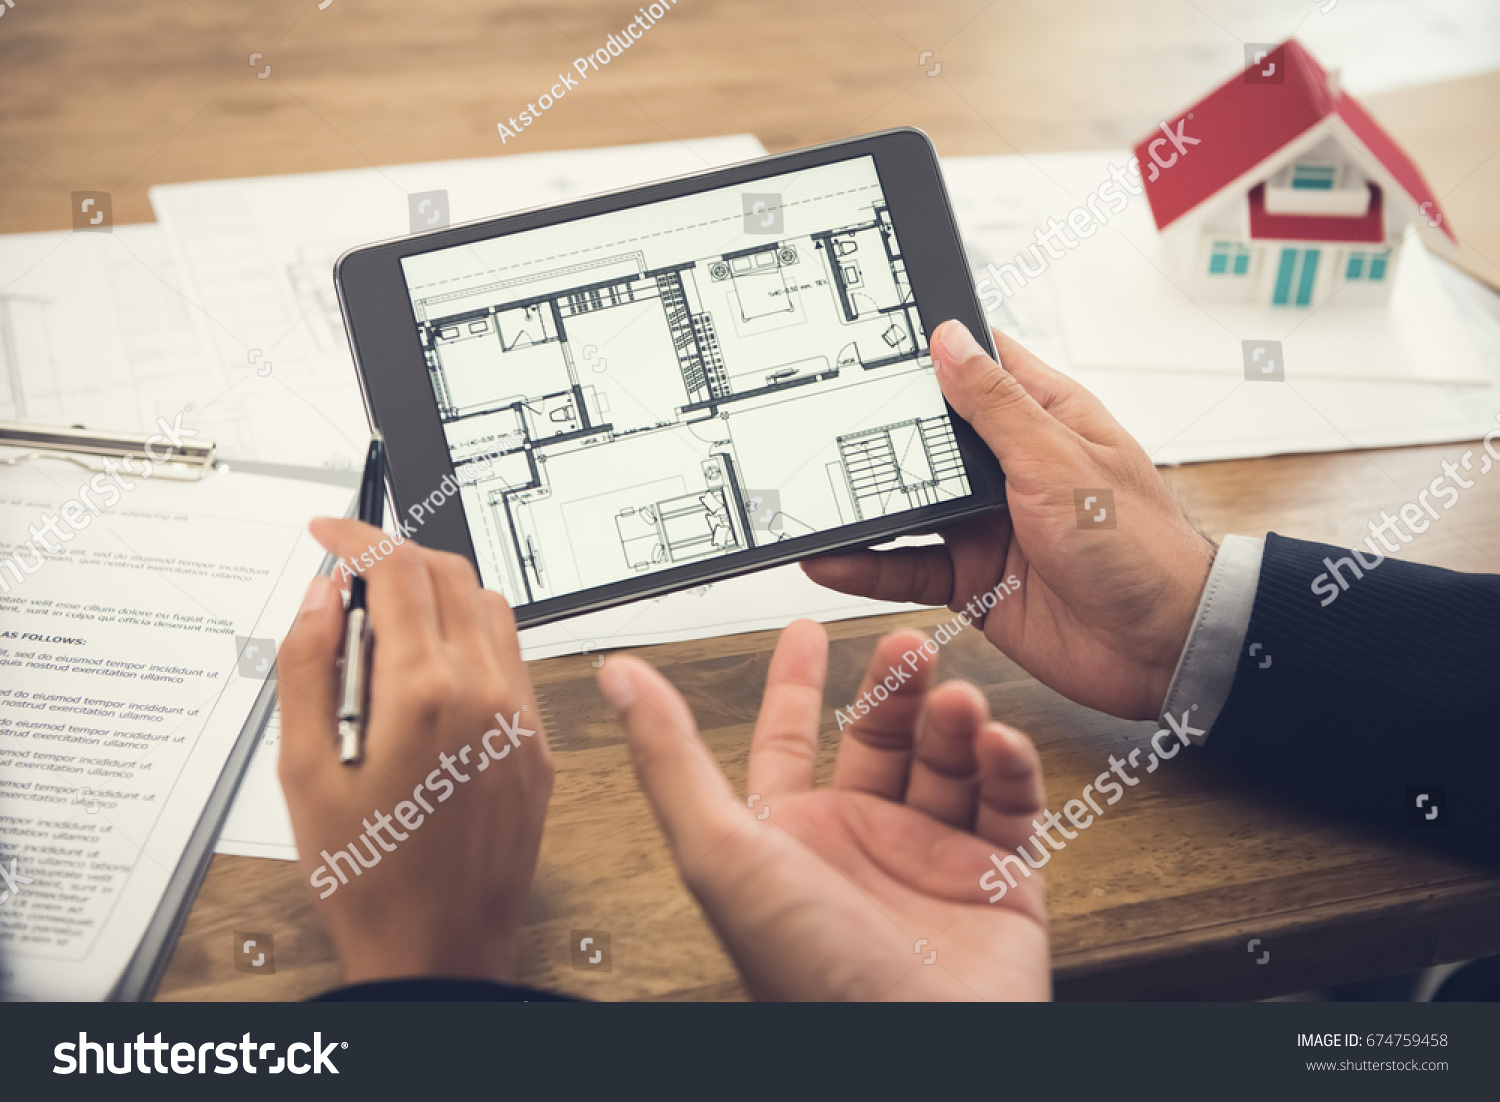 Real estate agent with client or architect team discussing house floor plan on tablet computer screen #674759458